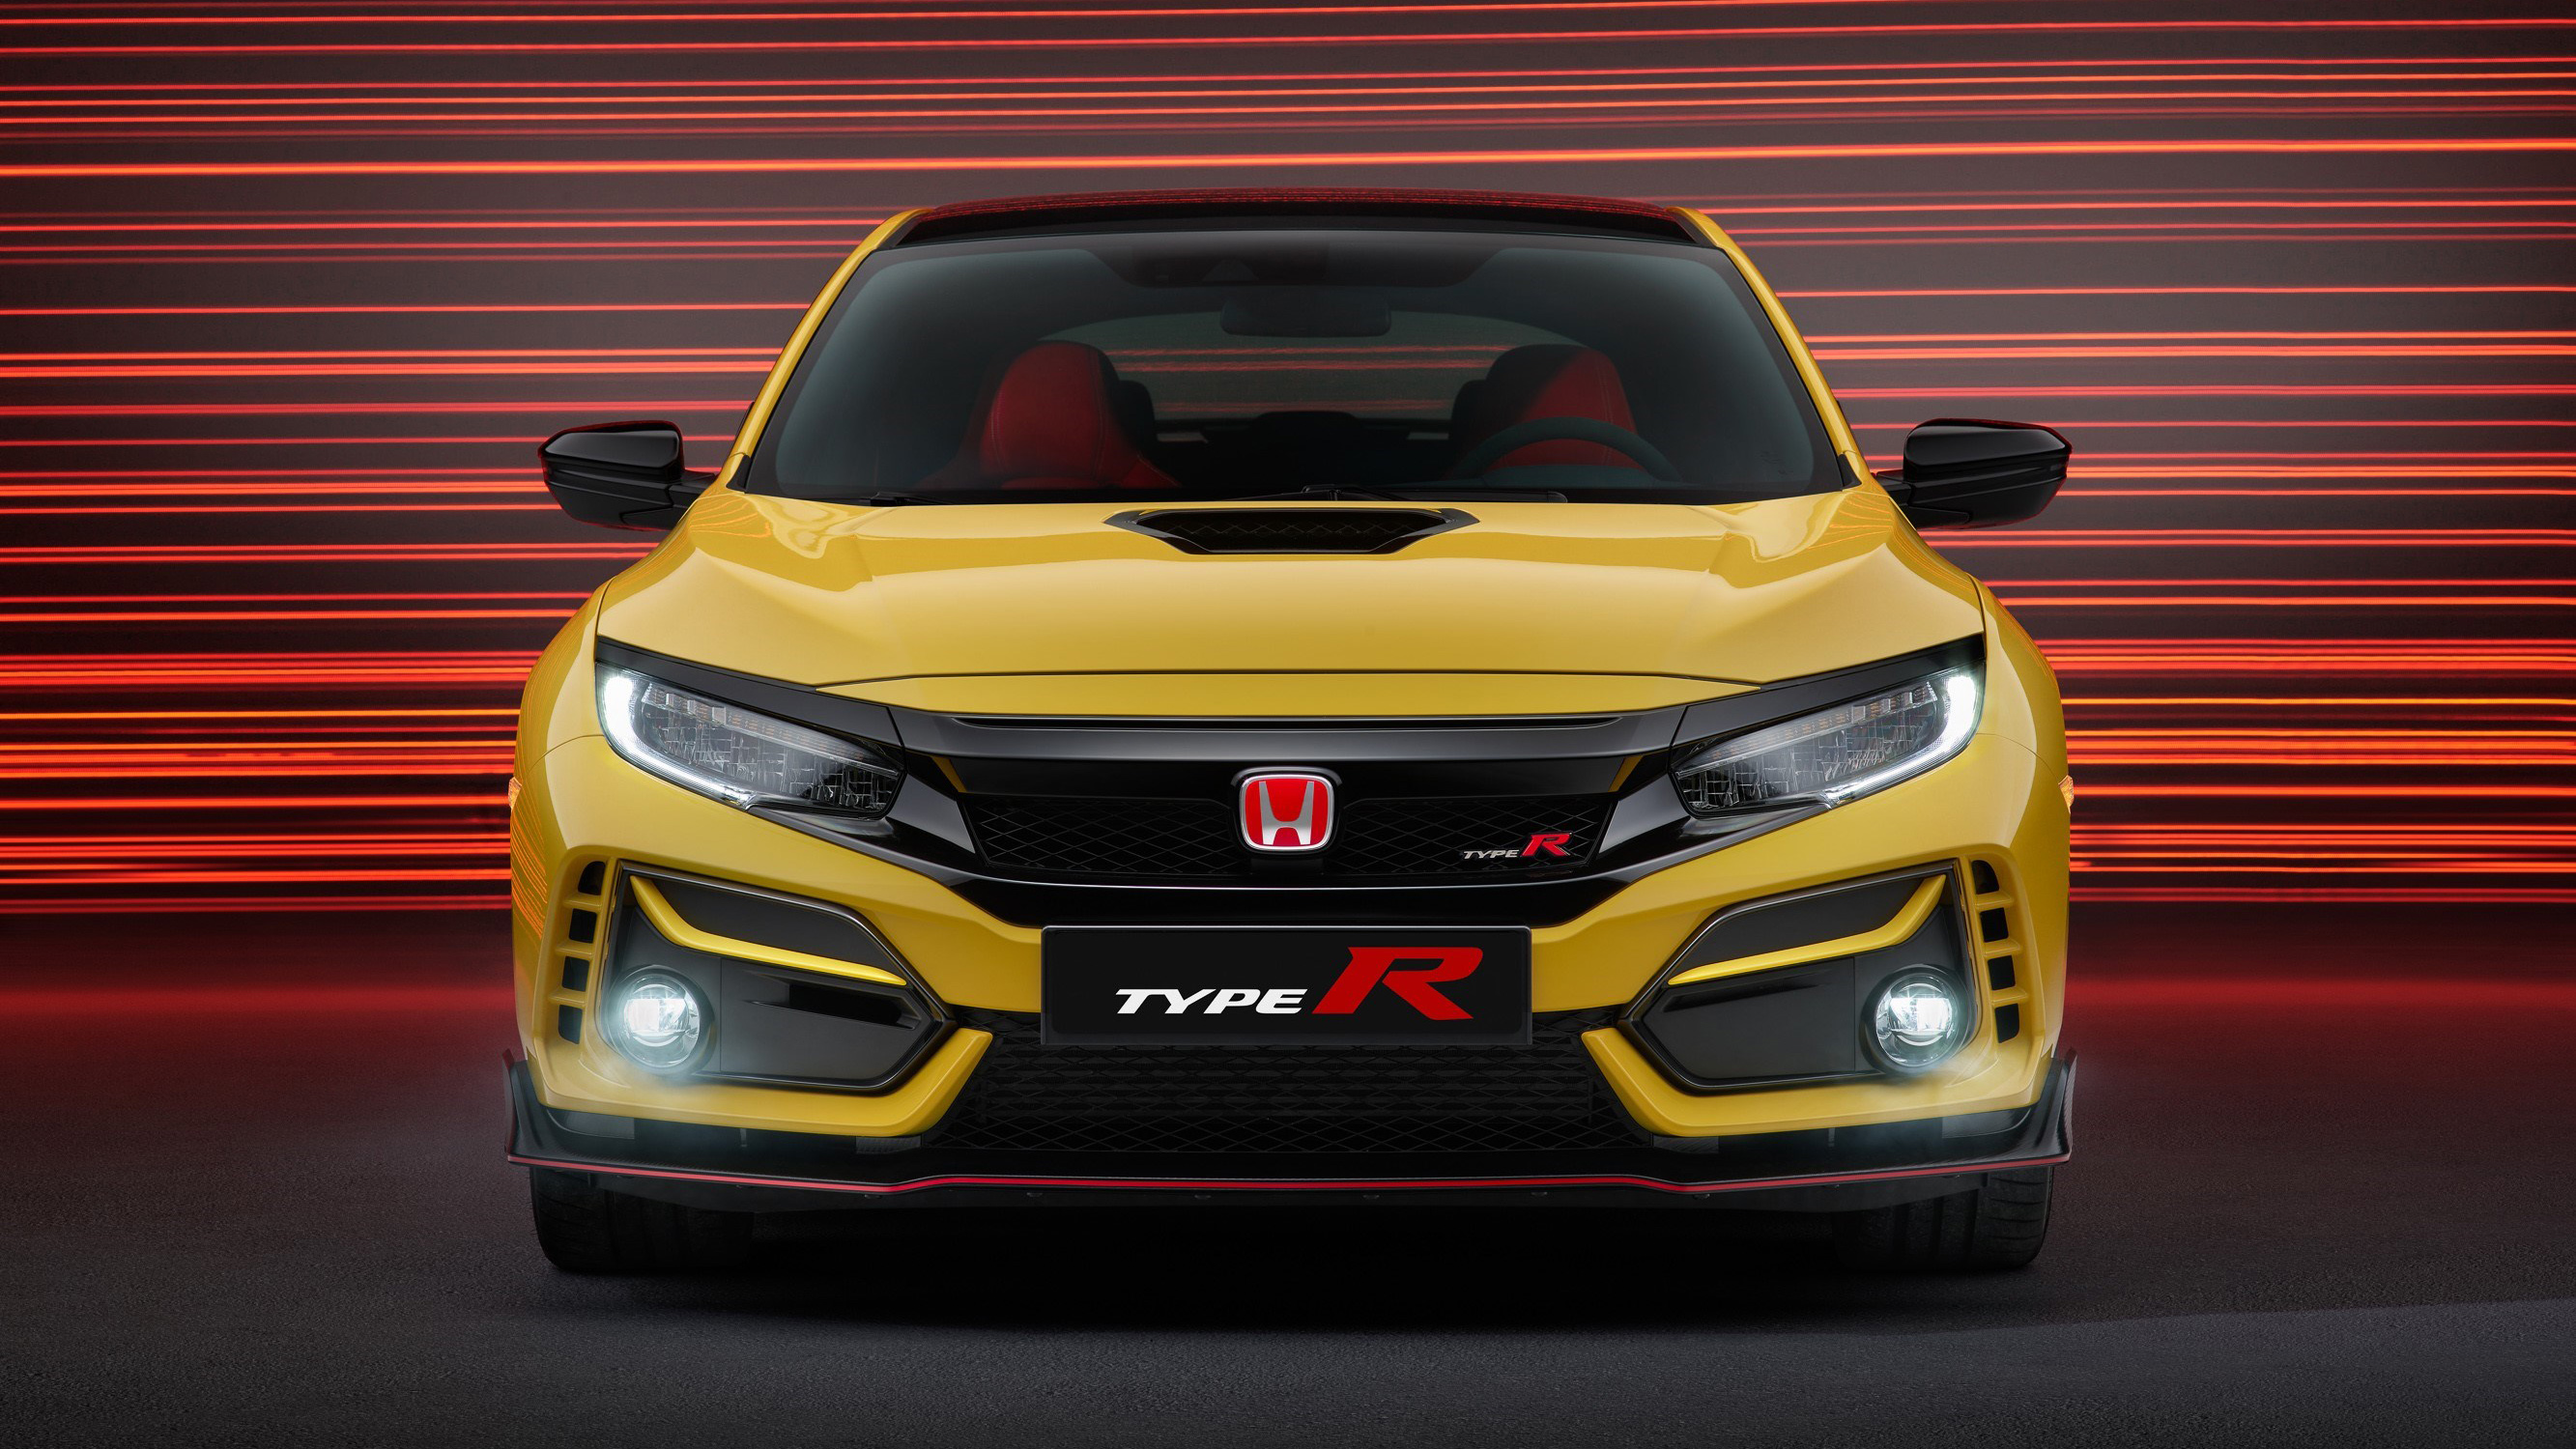 Download Honda Civic Type R wallpapers for mobile phone free Honda  Civic Type R HD pictures